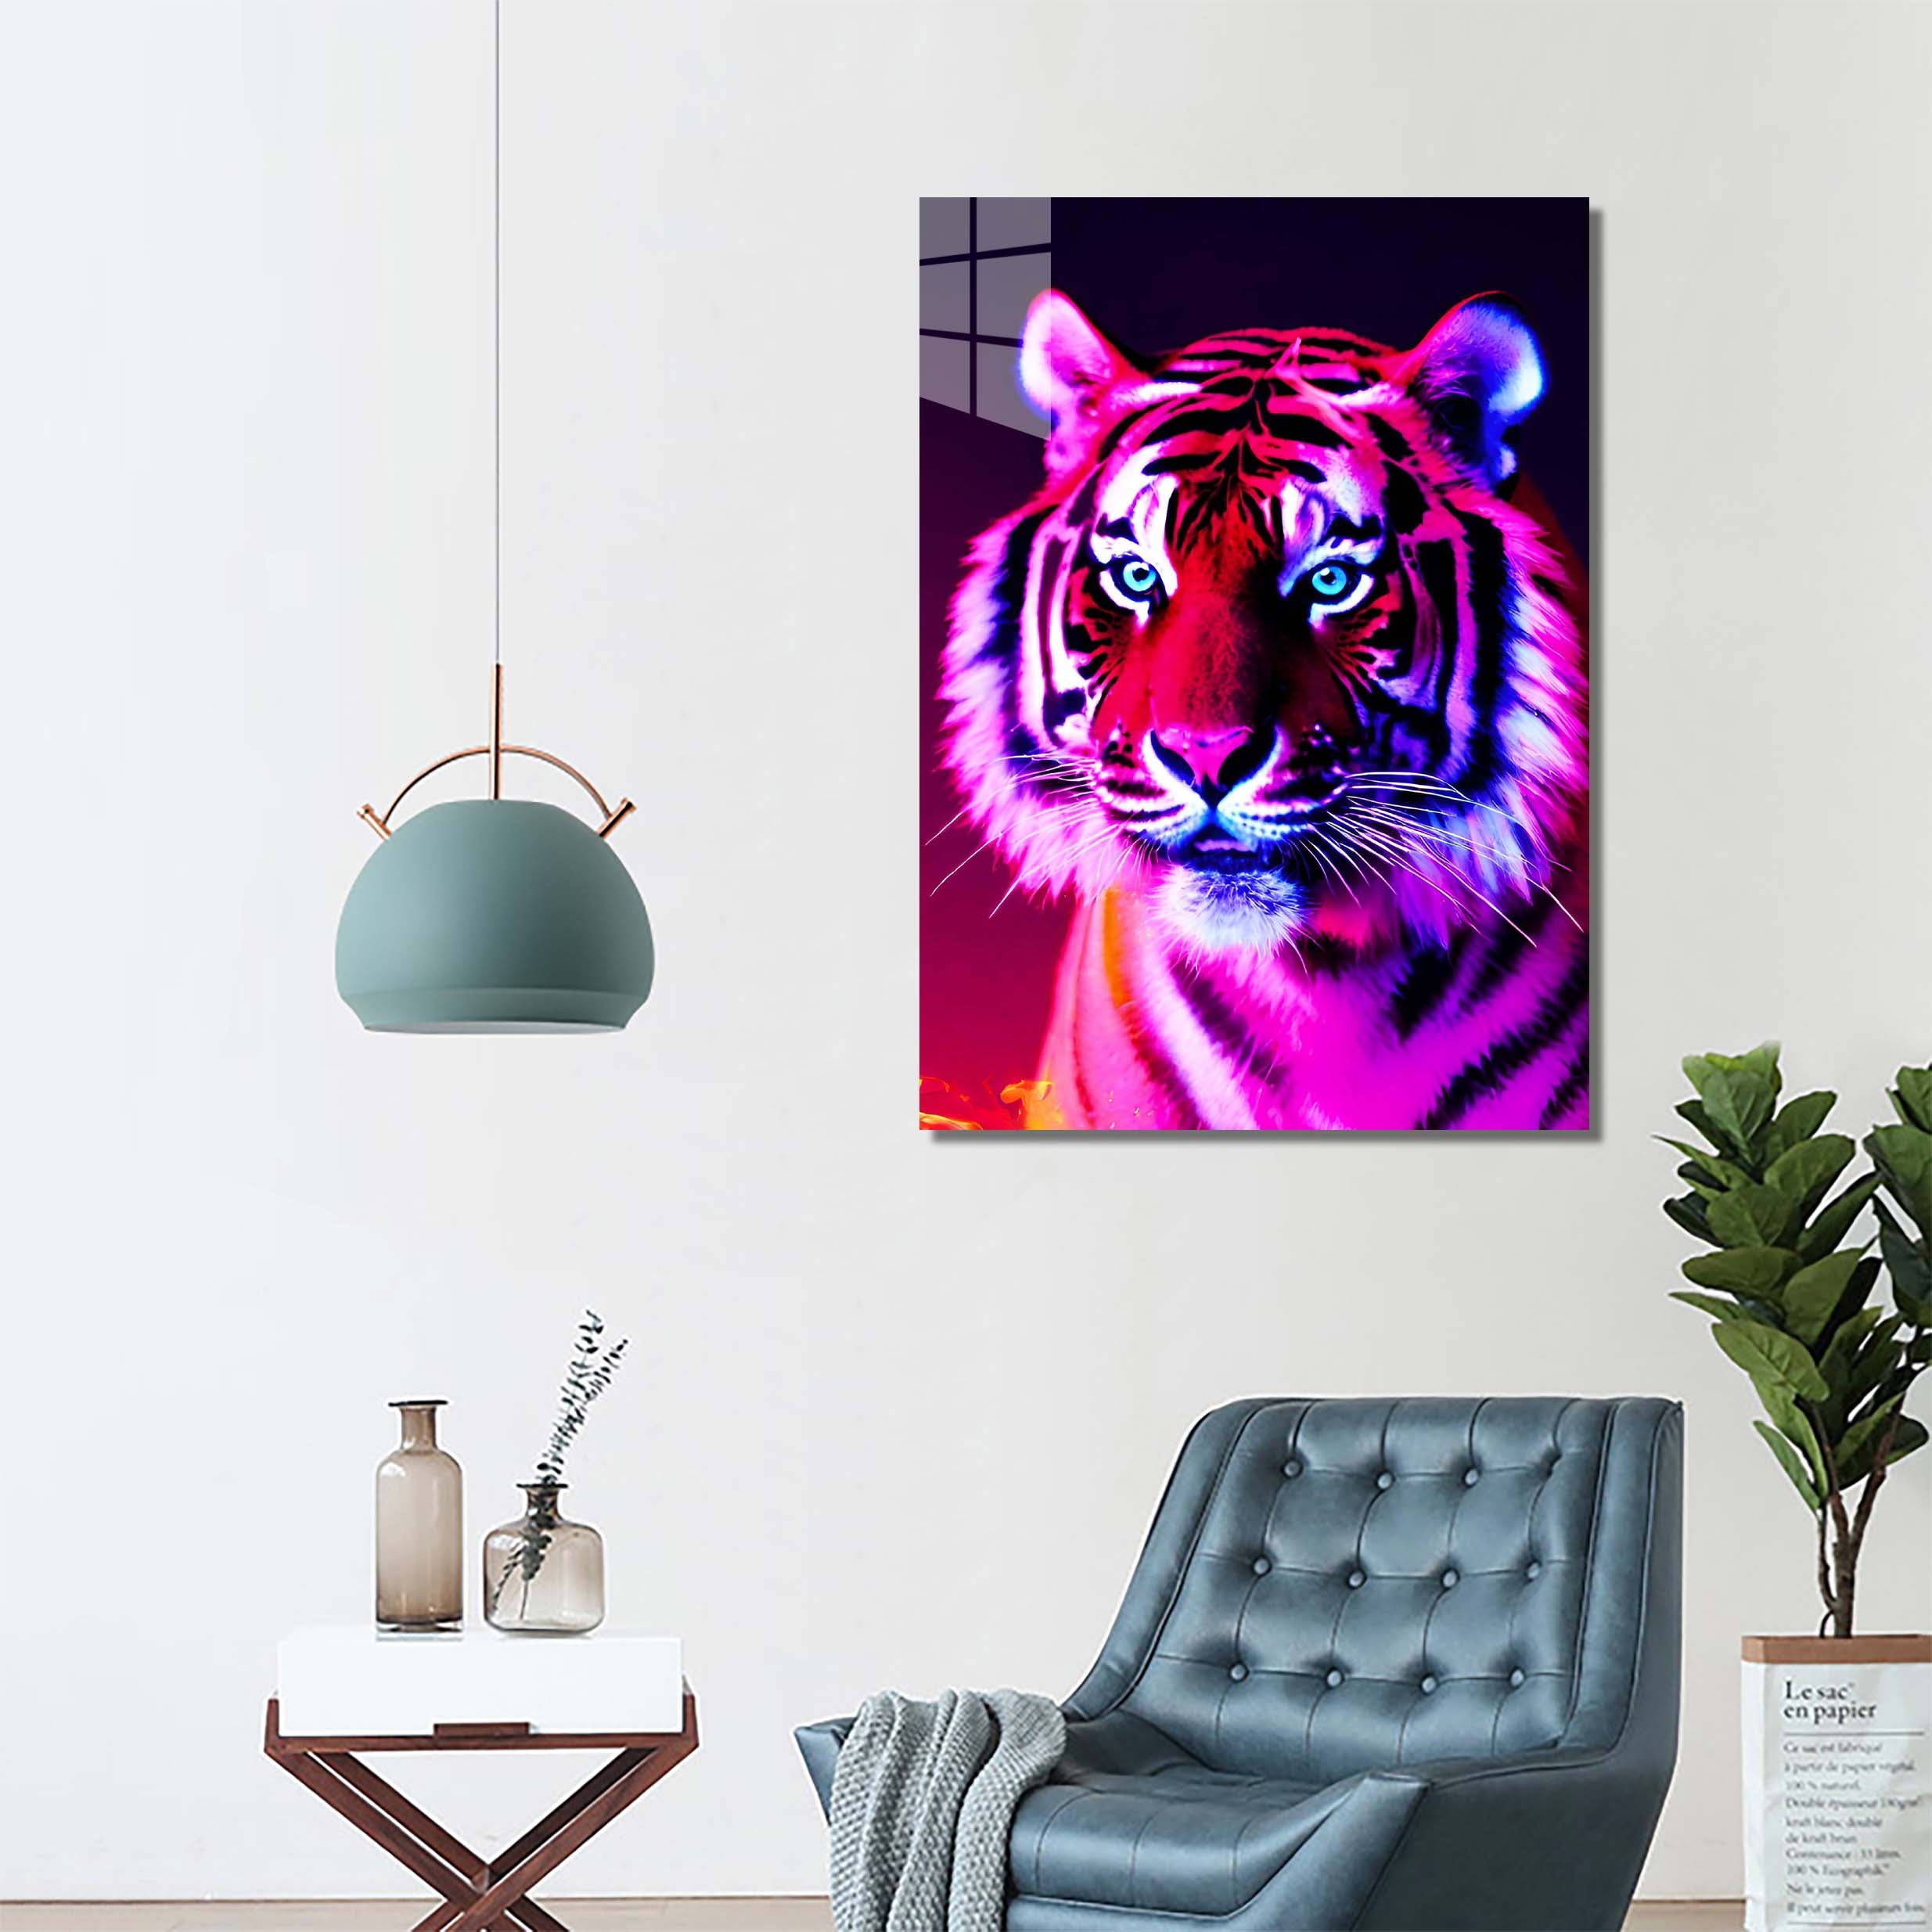 Tiger Angry Retrowave-designed by @DynCreative